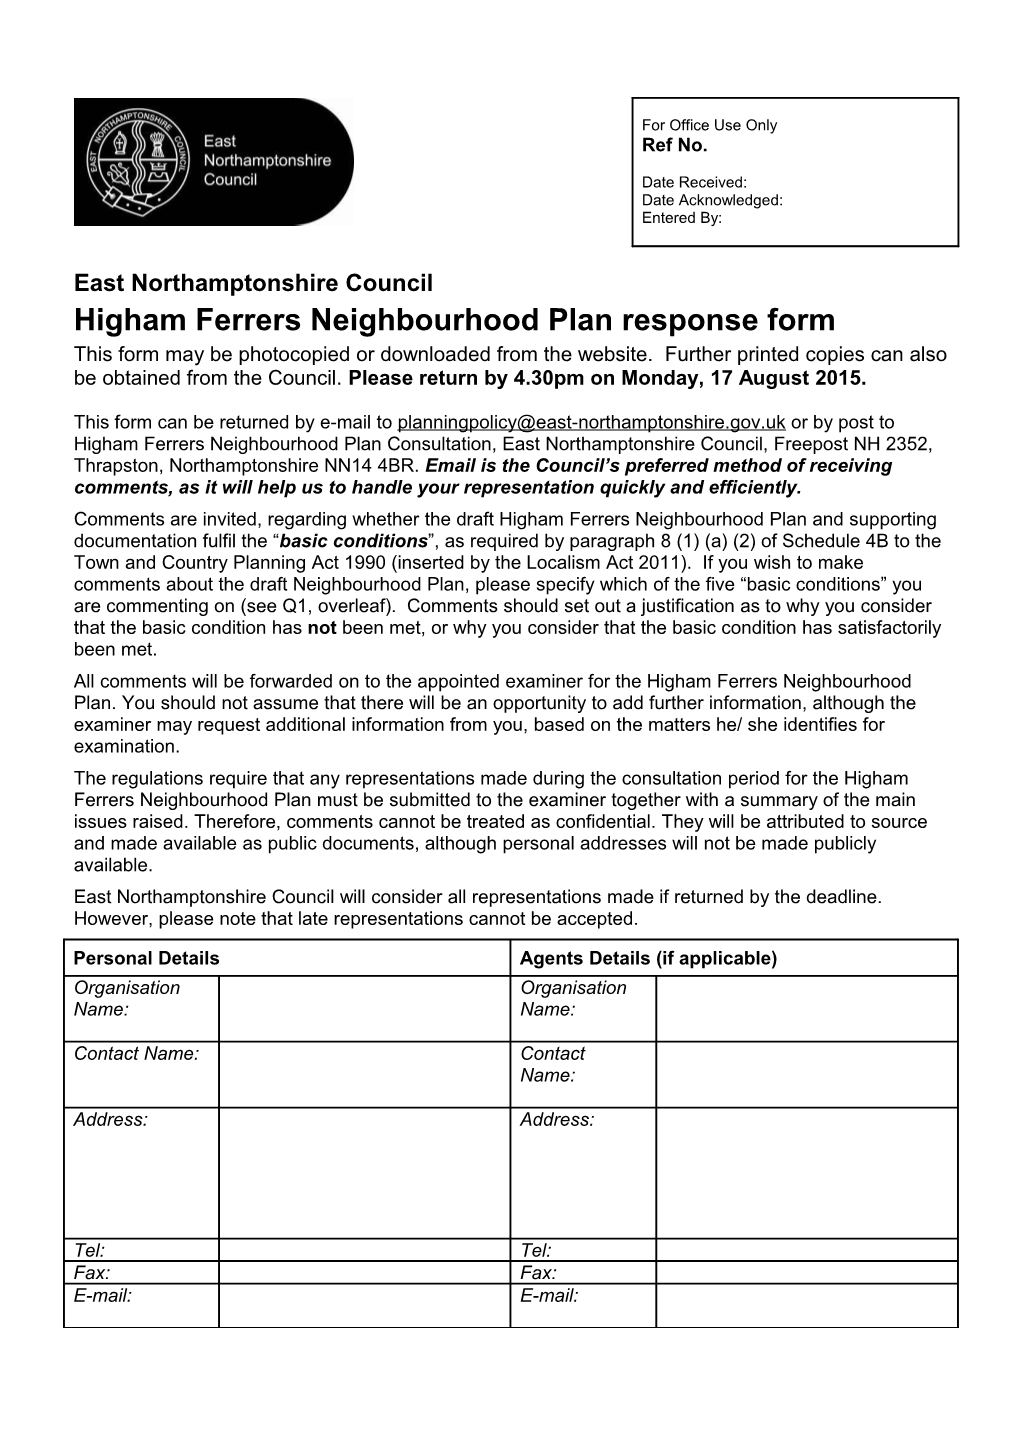 This Form Can Be Returned by E-Mail to Or by Post to Higham Ferrers Neighbourhood Plan